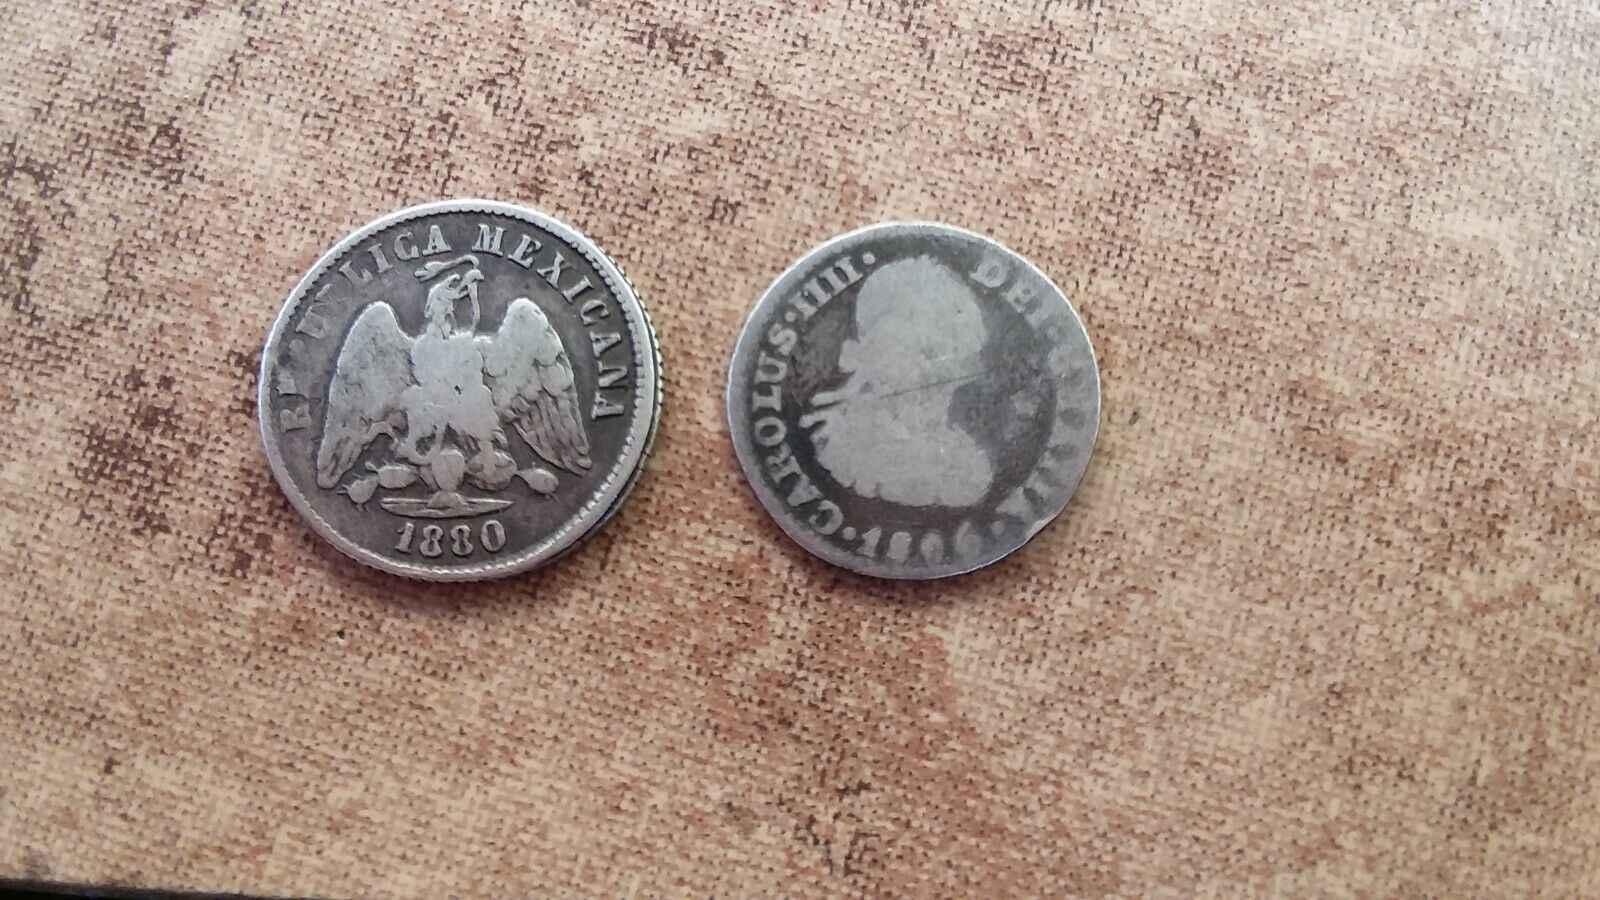 Old Mexican 10 Centavos Coin (1880) And One Real Coin (1806)!